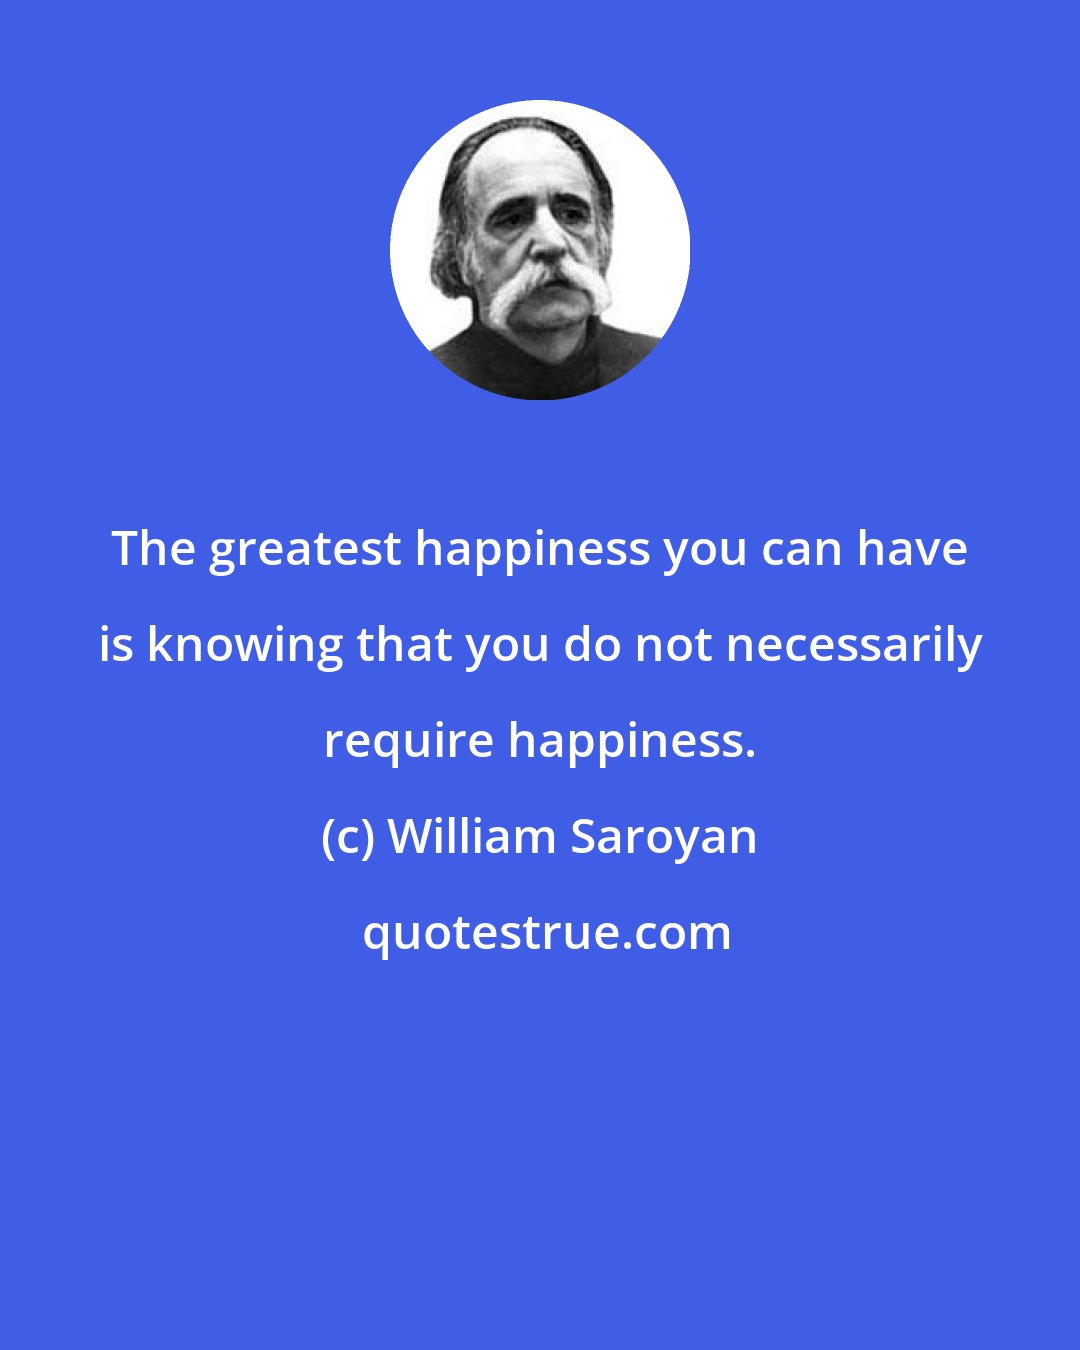 William Saroyan: The greatest happiness you can have is knowing that you do not necessarily require happiness.